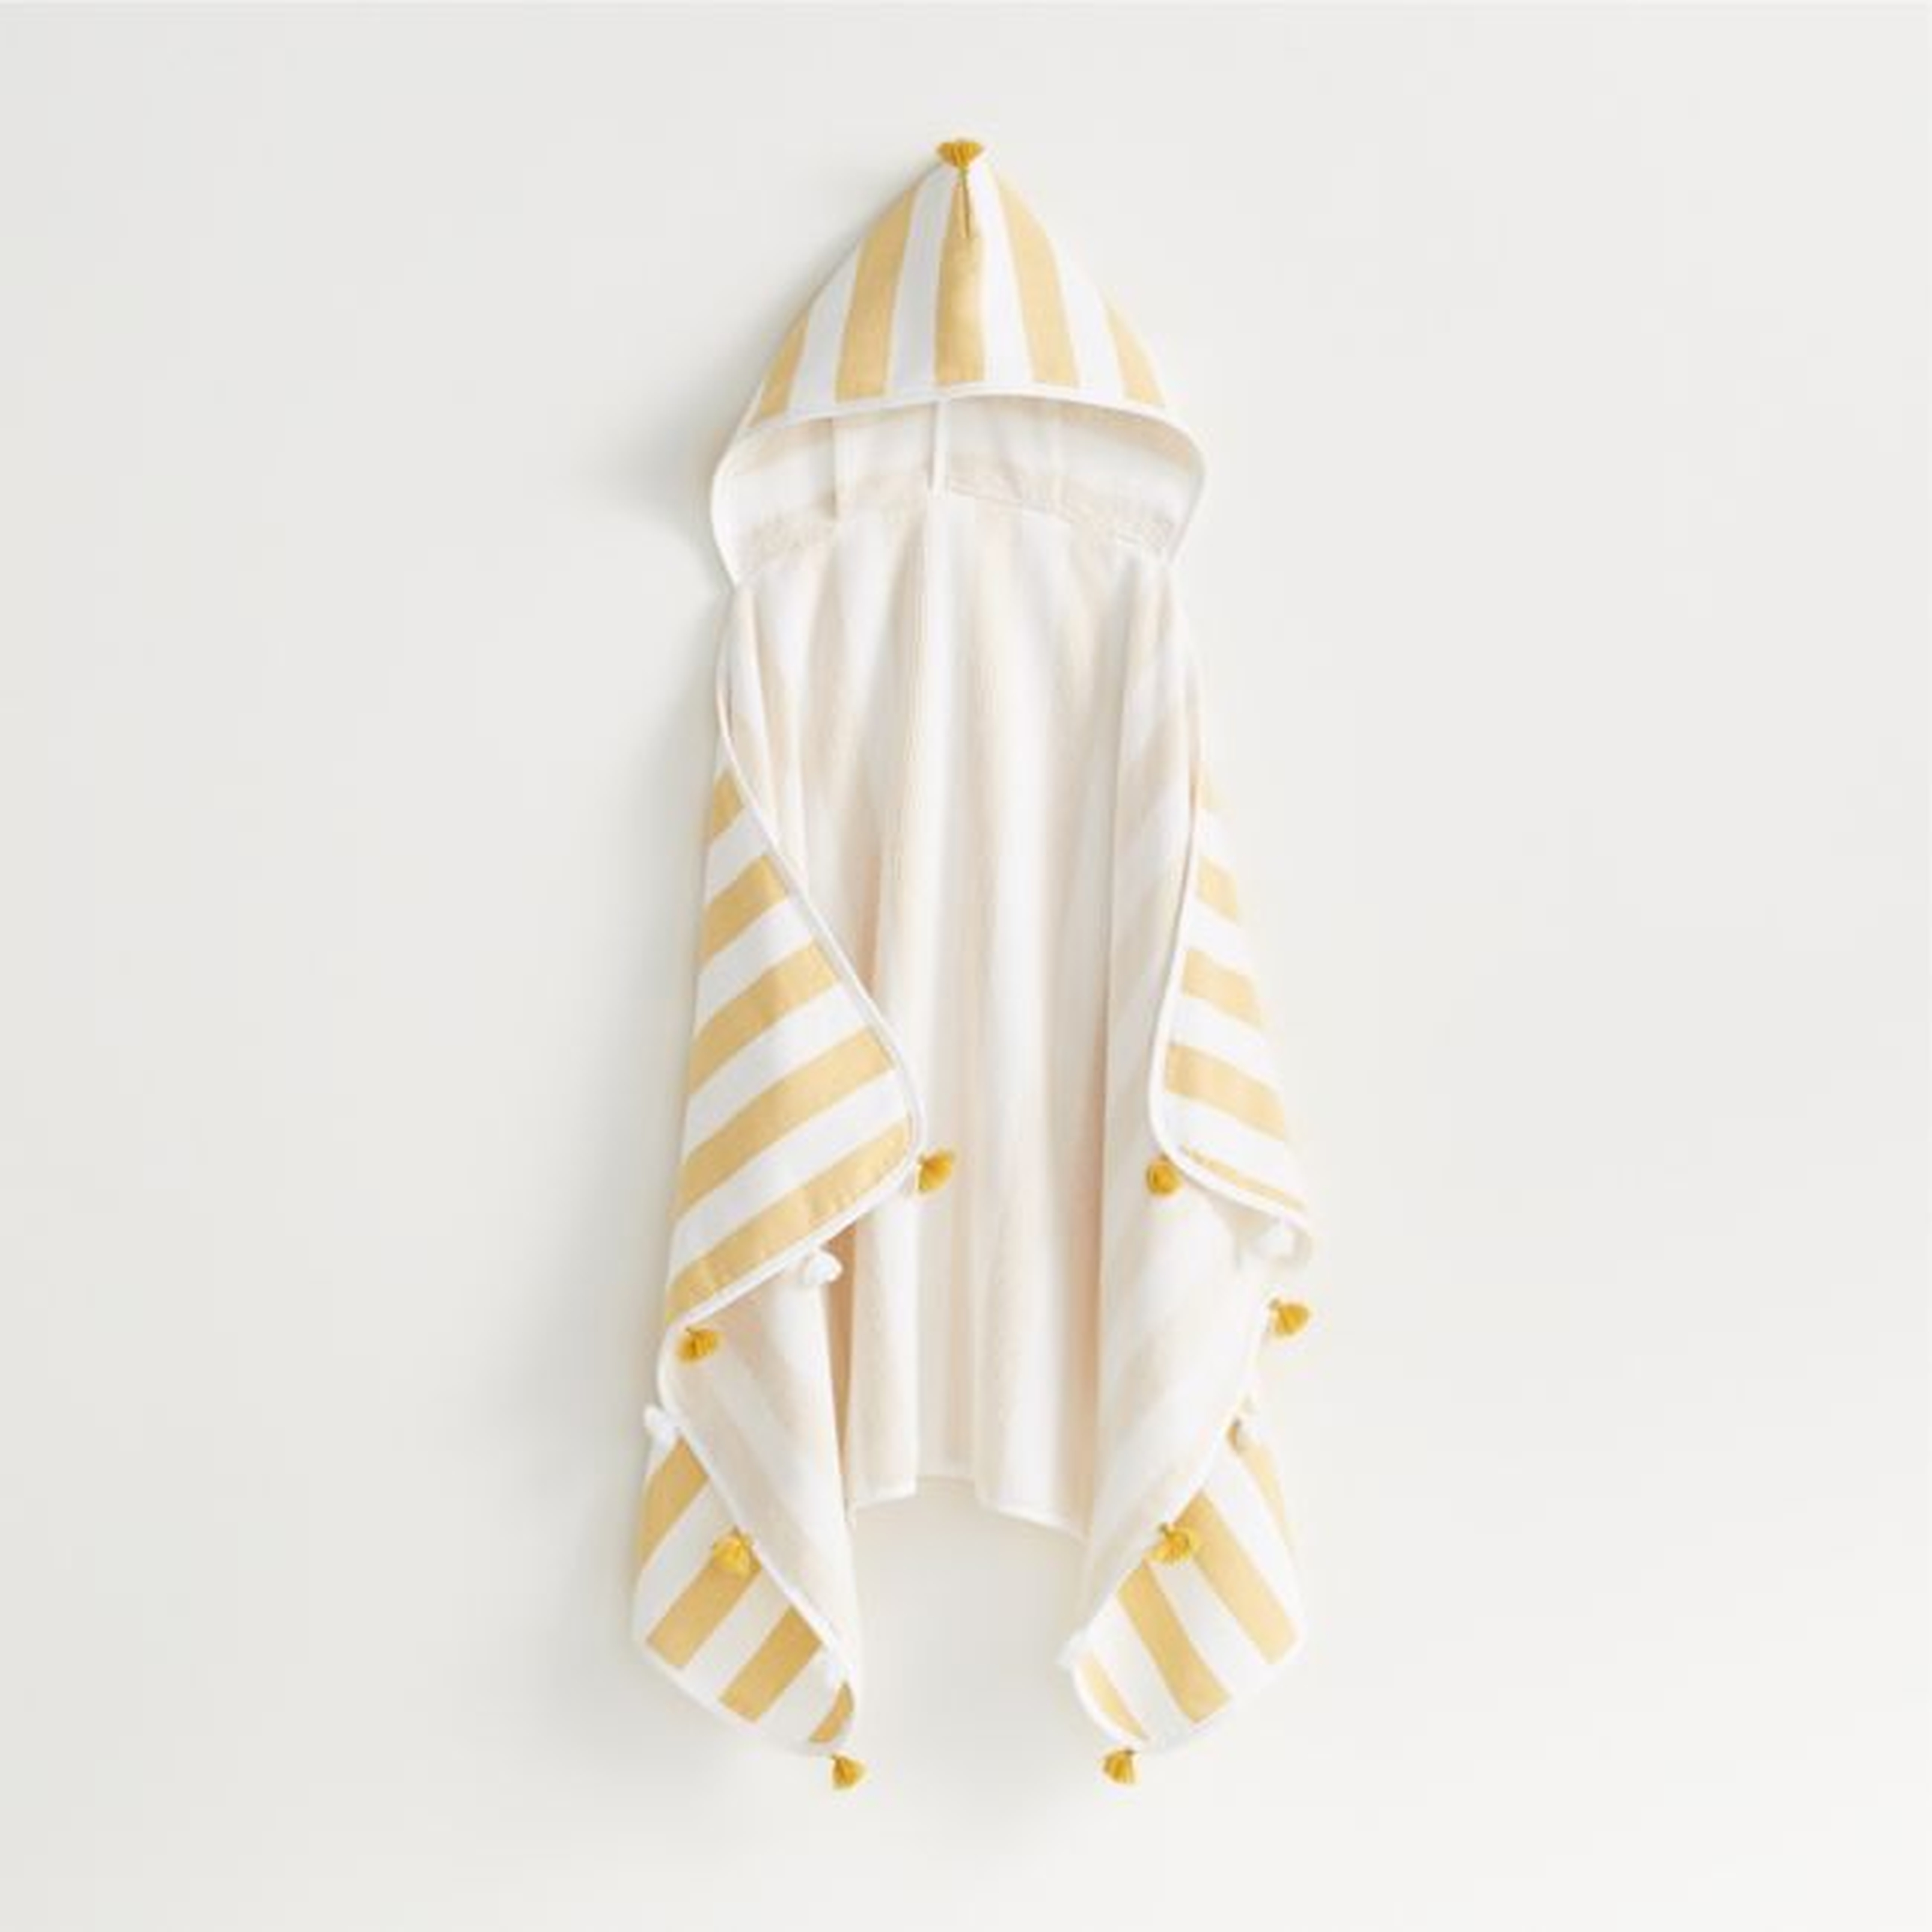 Yellow Striped with Tassles Organic Kids Hooded Towel - Crate and Barrel